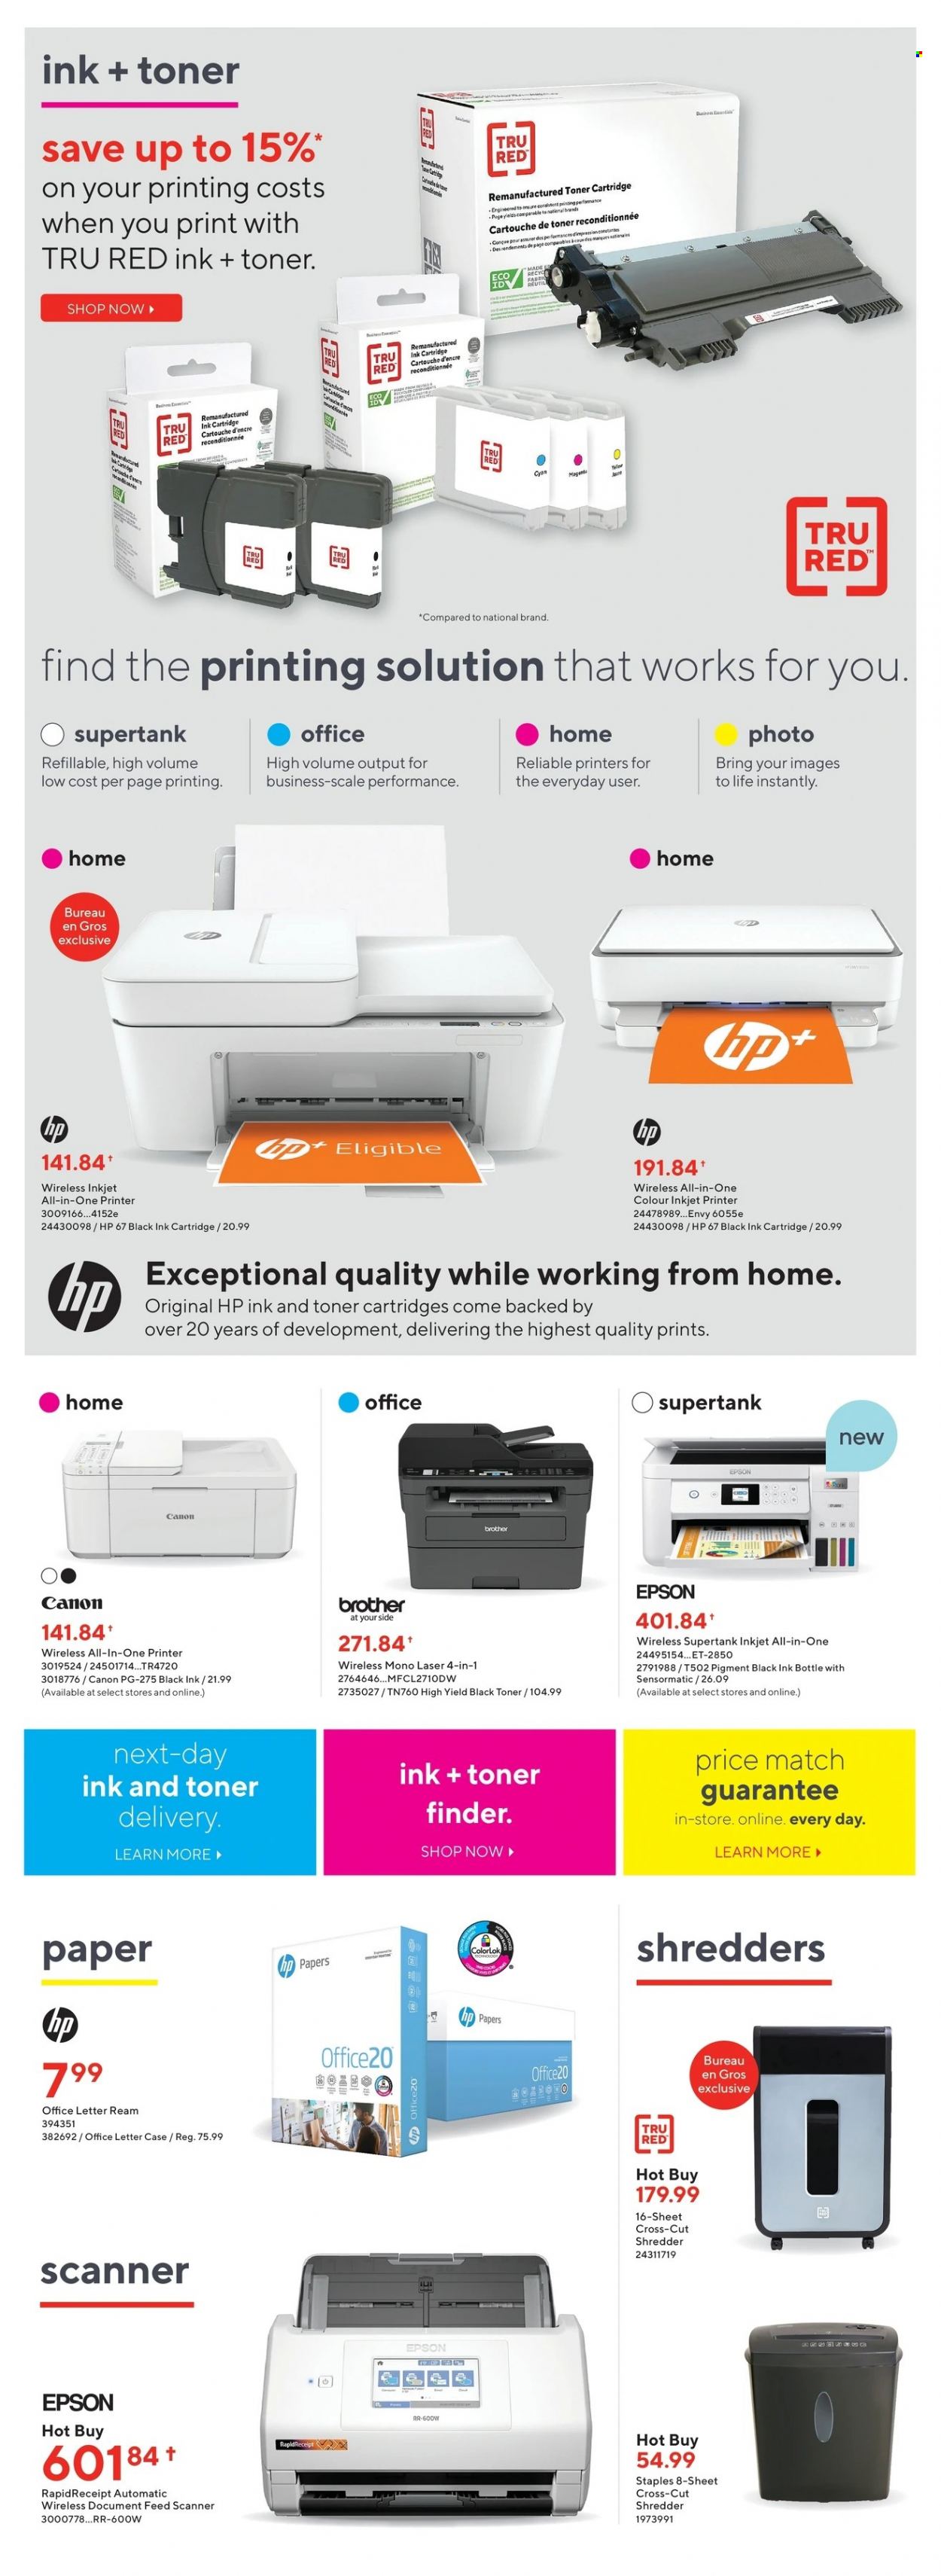 thumbnail - Bureau en Gros Flyer - January 12, 2022 - January 18, 2022 - Sales products - Office Home, Hewlett Packard, scale, Brother, all-in-one printer, ink printer, printer, Epson, scanner, shredder, toner, Canon. Page 9.